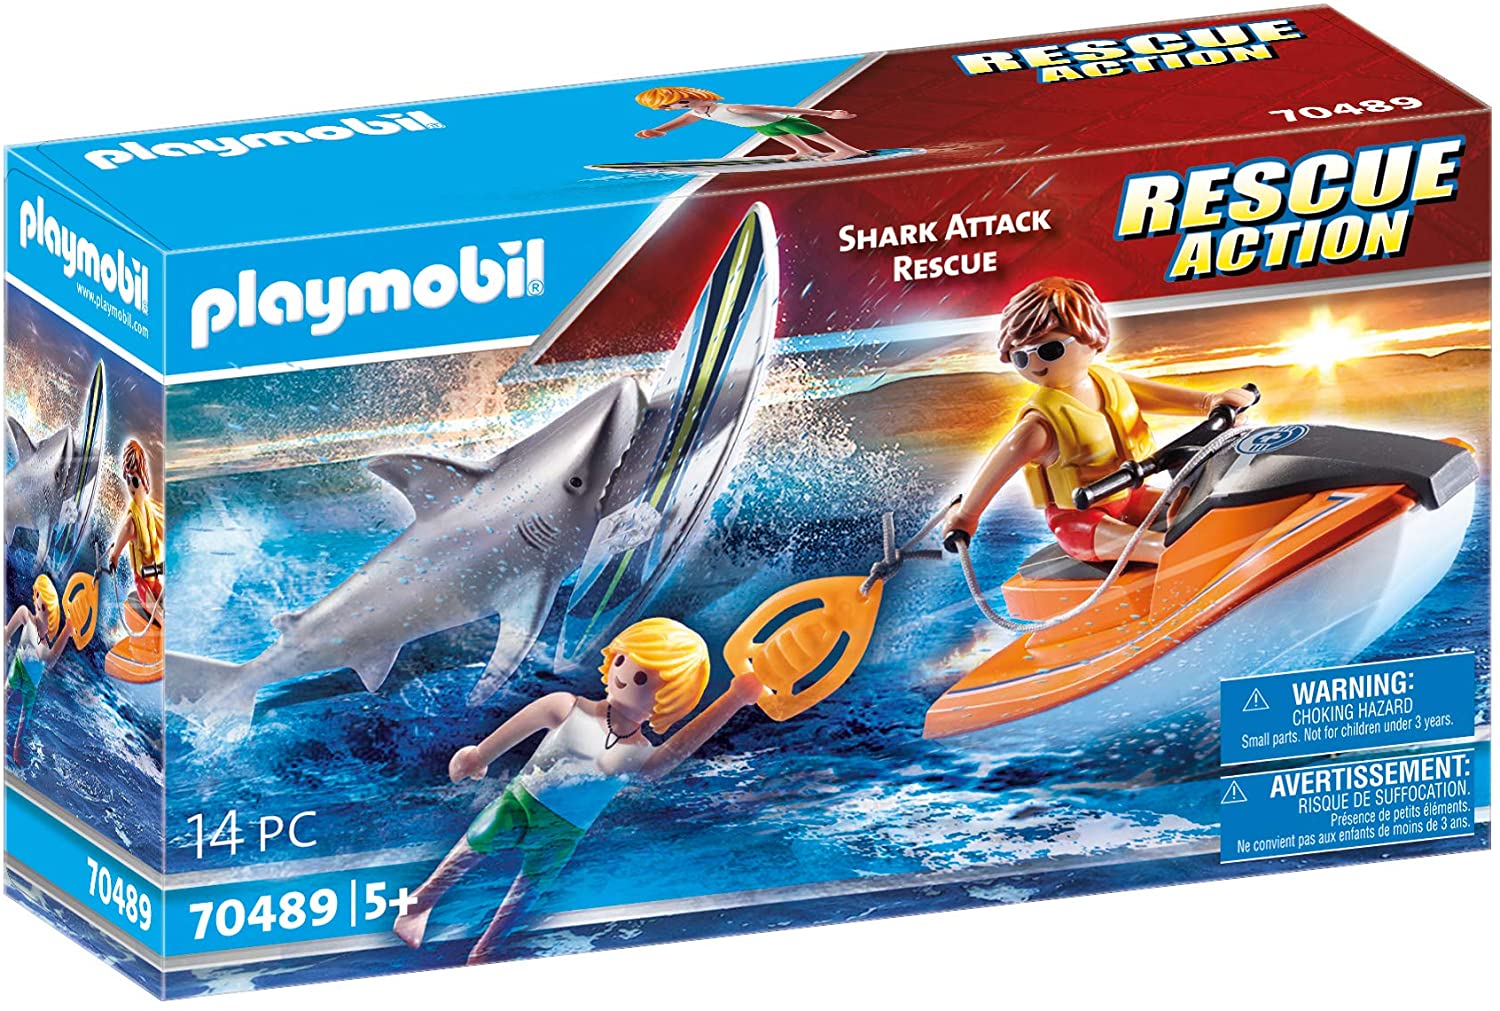 14-Pc Playmobil Shark Attack & Rescue Boat Playset $10.70 + Free Shipping w/ Amazon Prime or Orders $25+